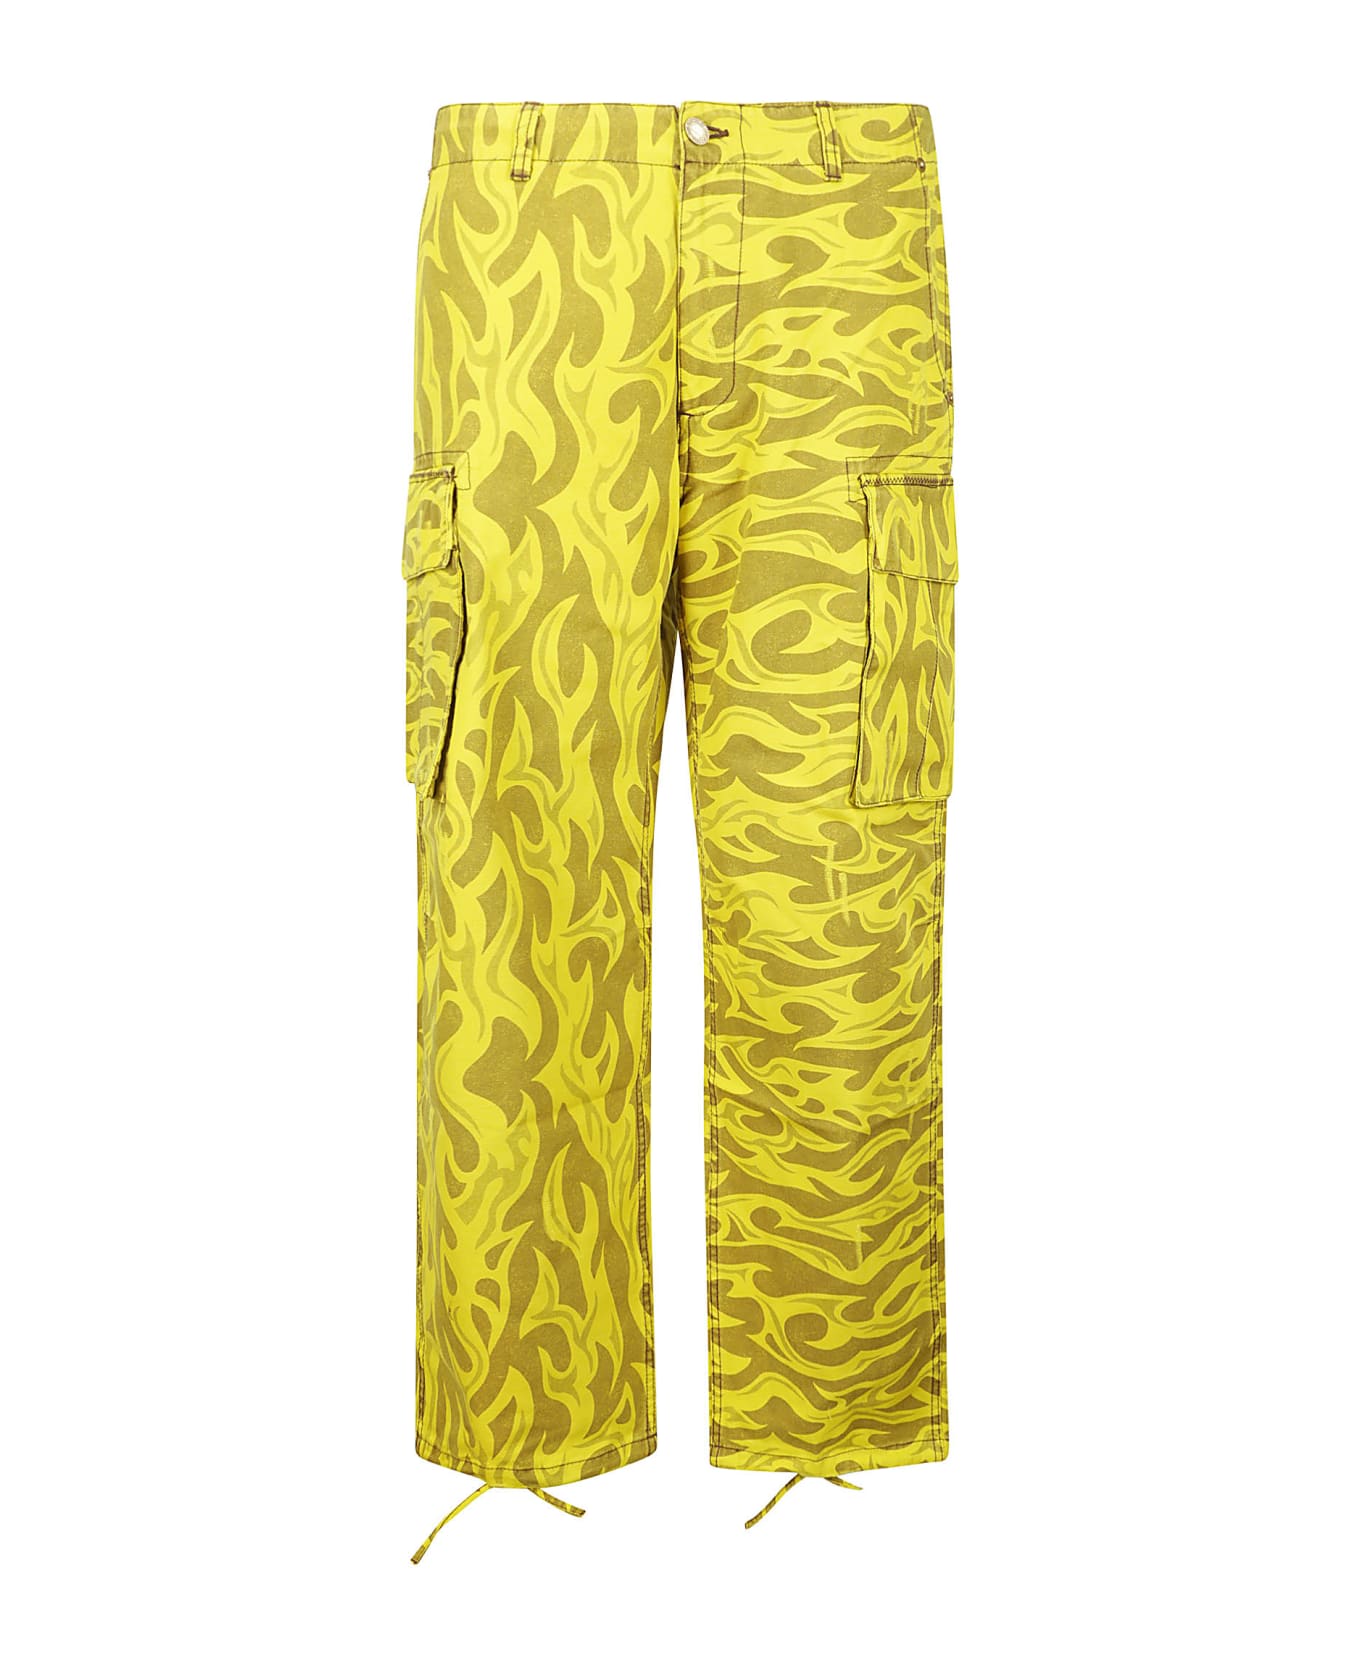 ERL Unisex Printed Cargo Pants Woven - YELLOW FLAME